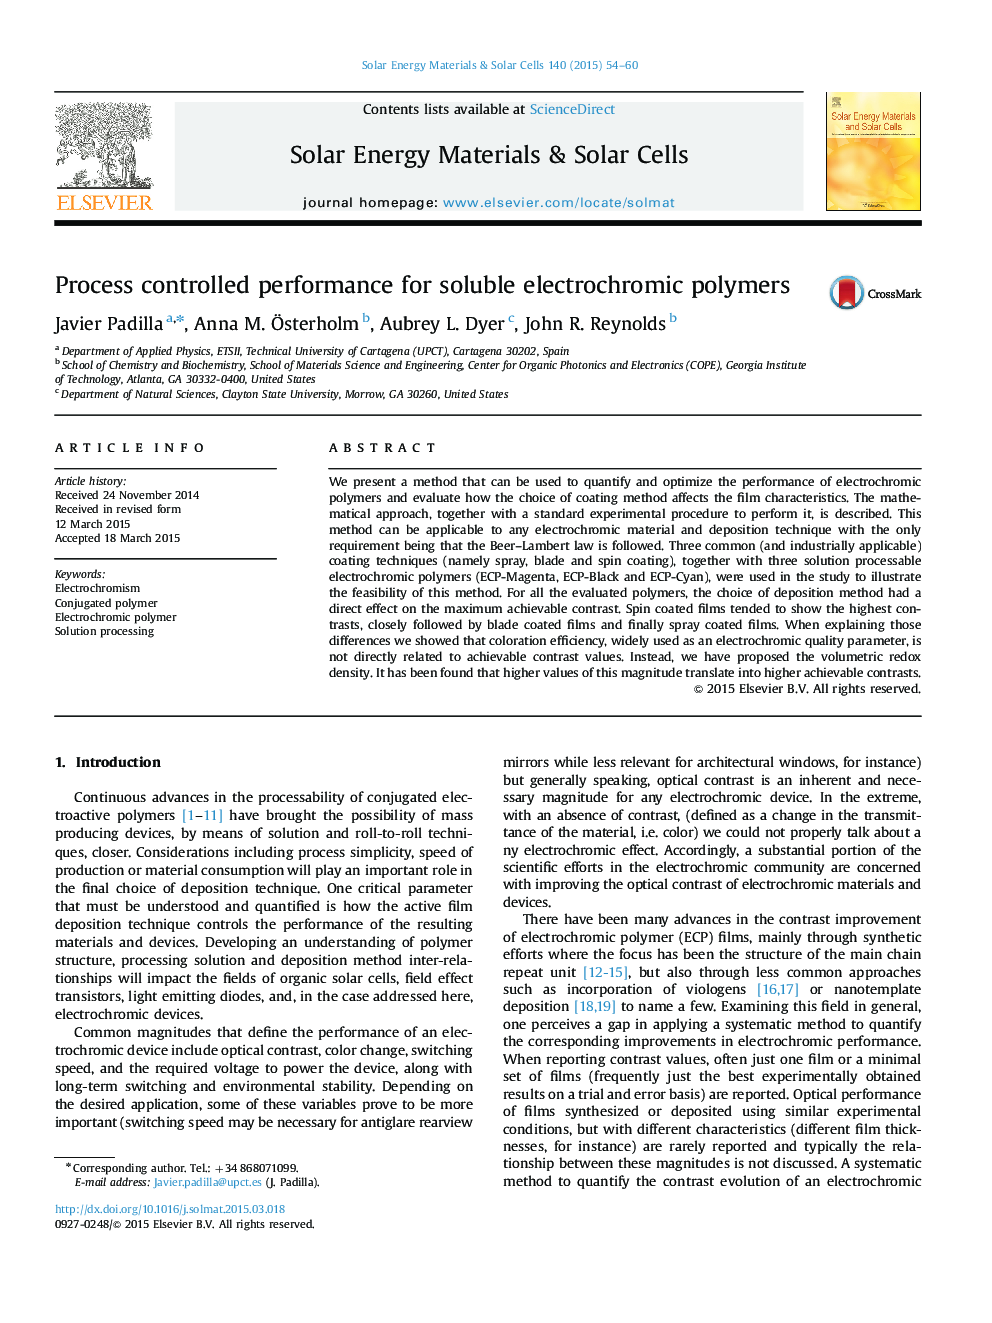 Process controlled performance for soluble electrochromic polymers